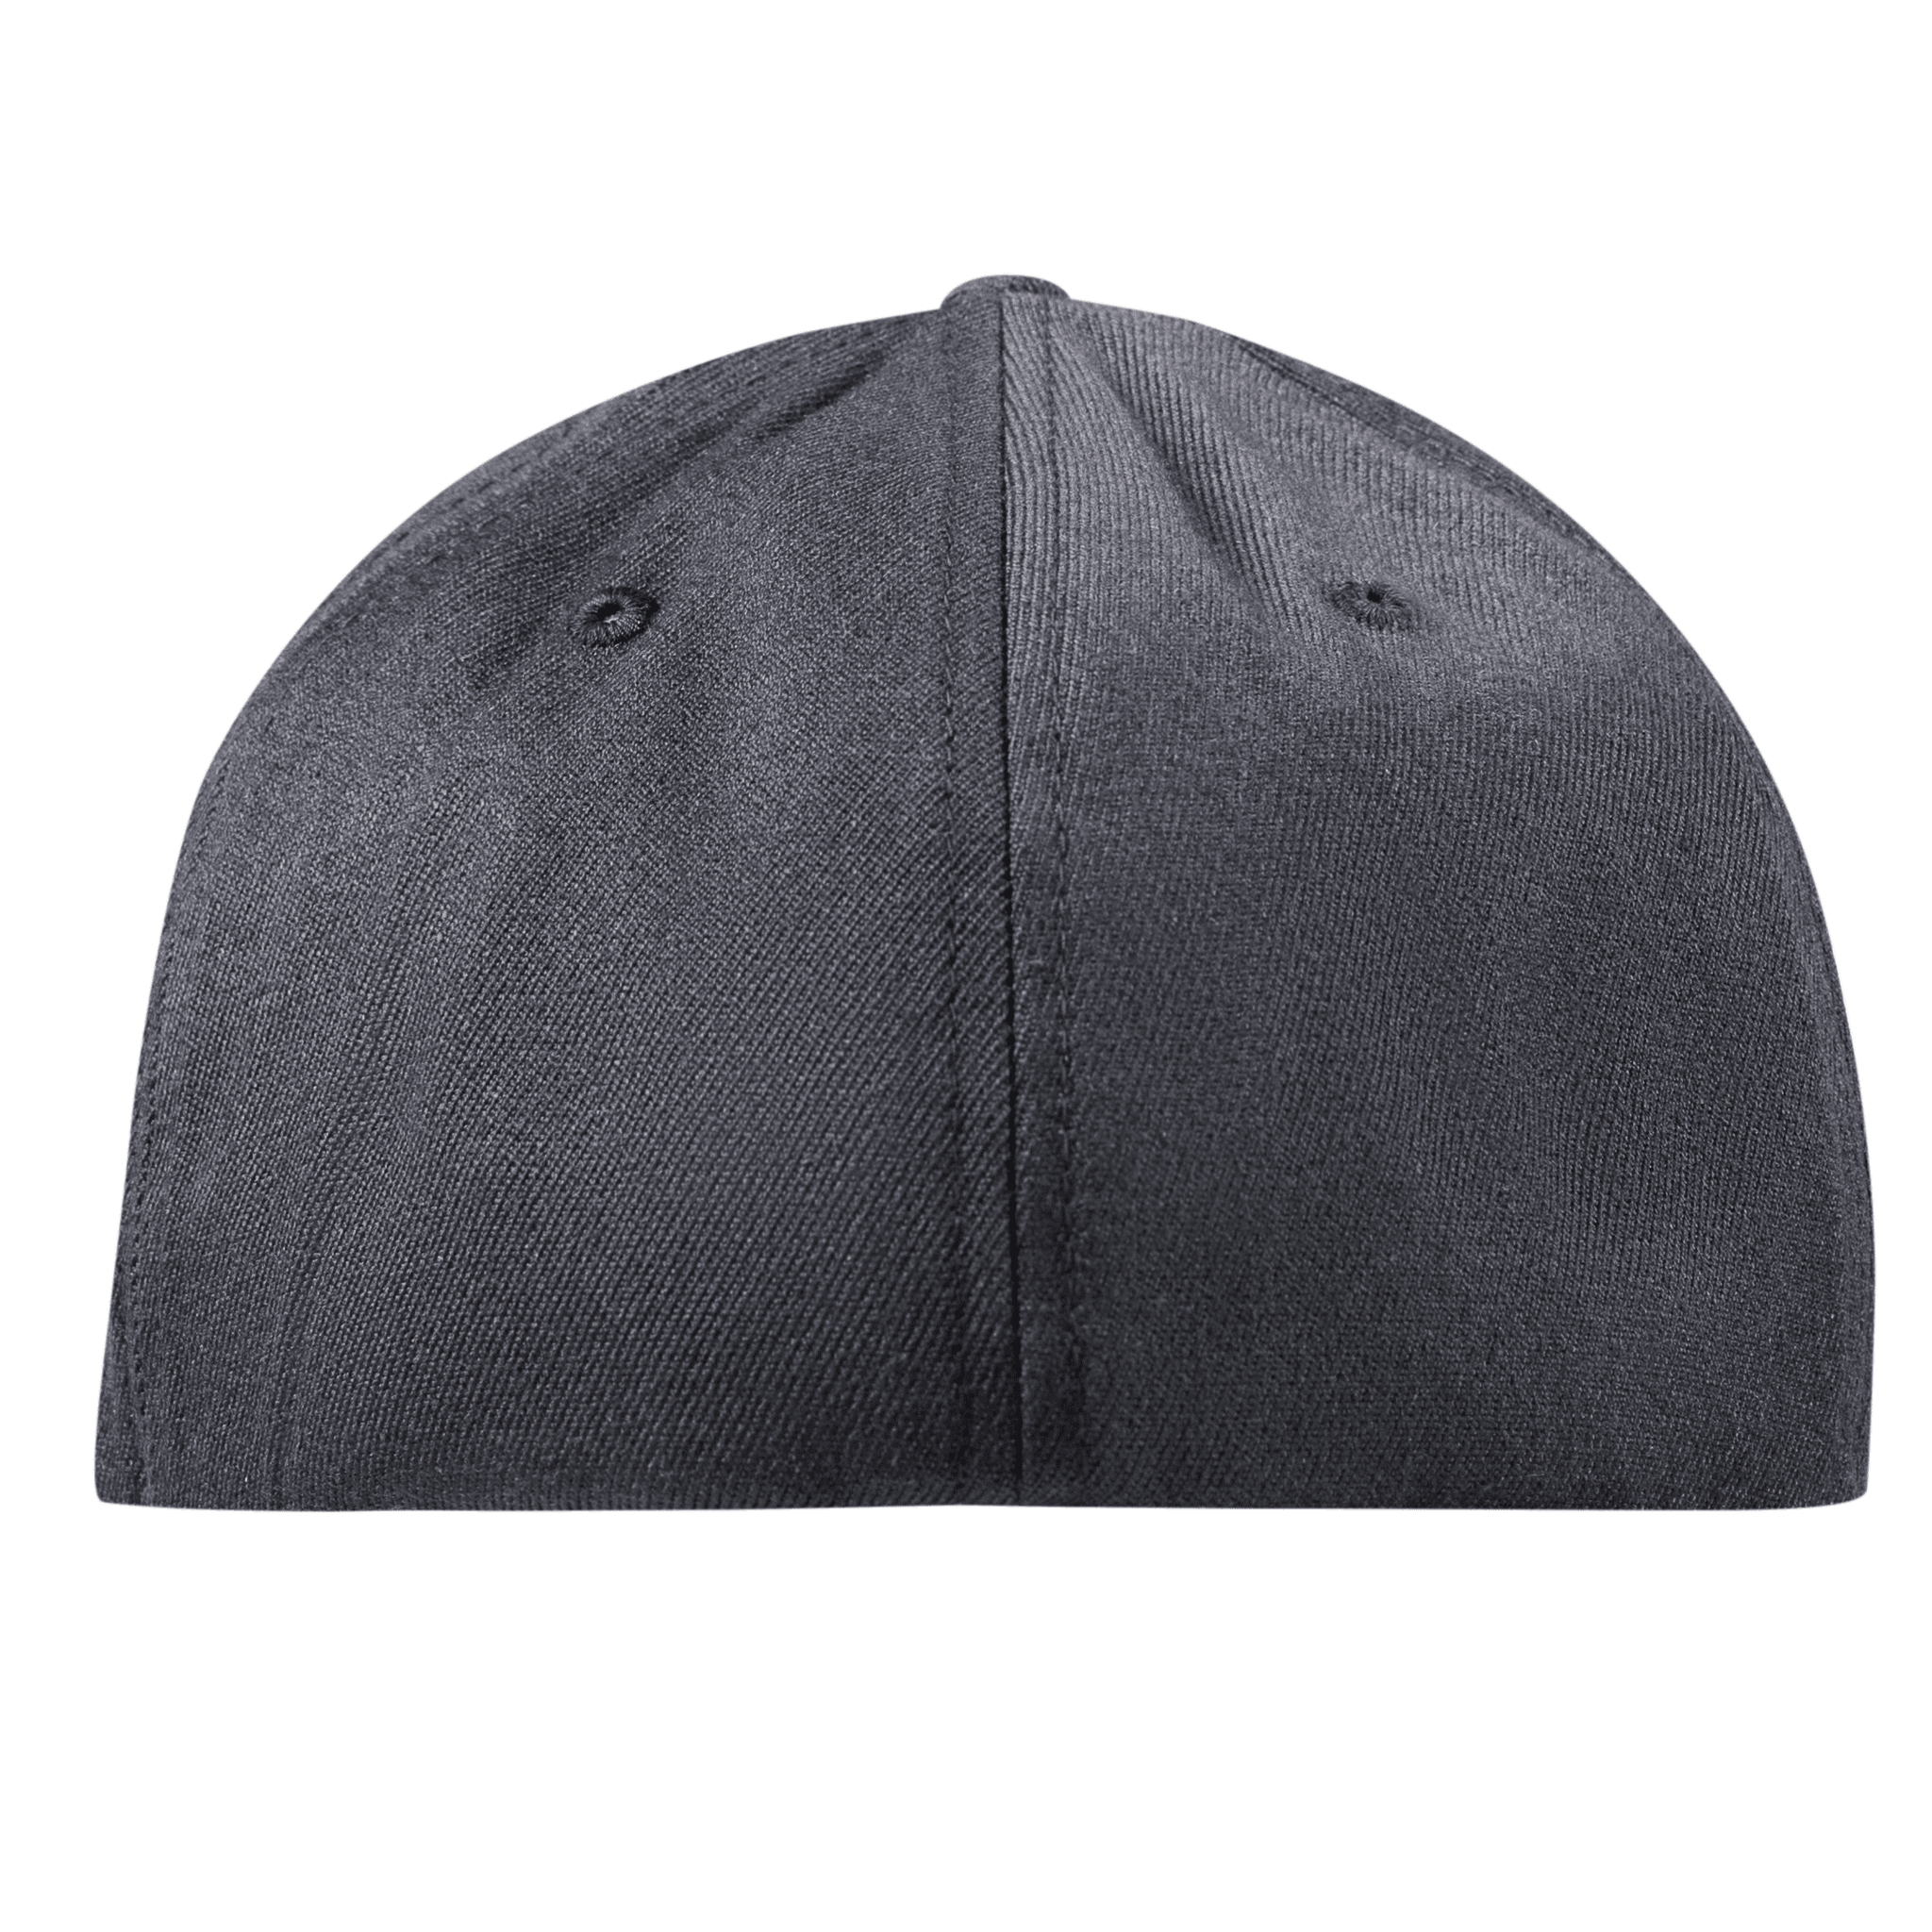 Montana Patriot Flexfit Fitted Back Charcoal